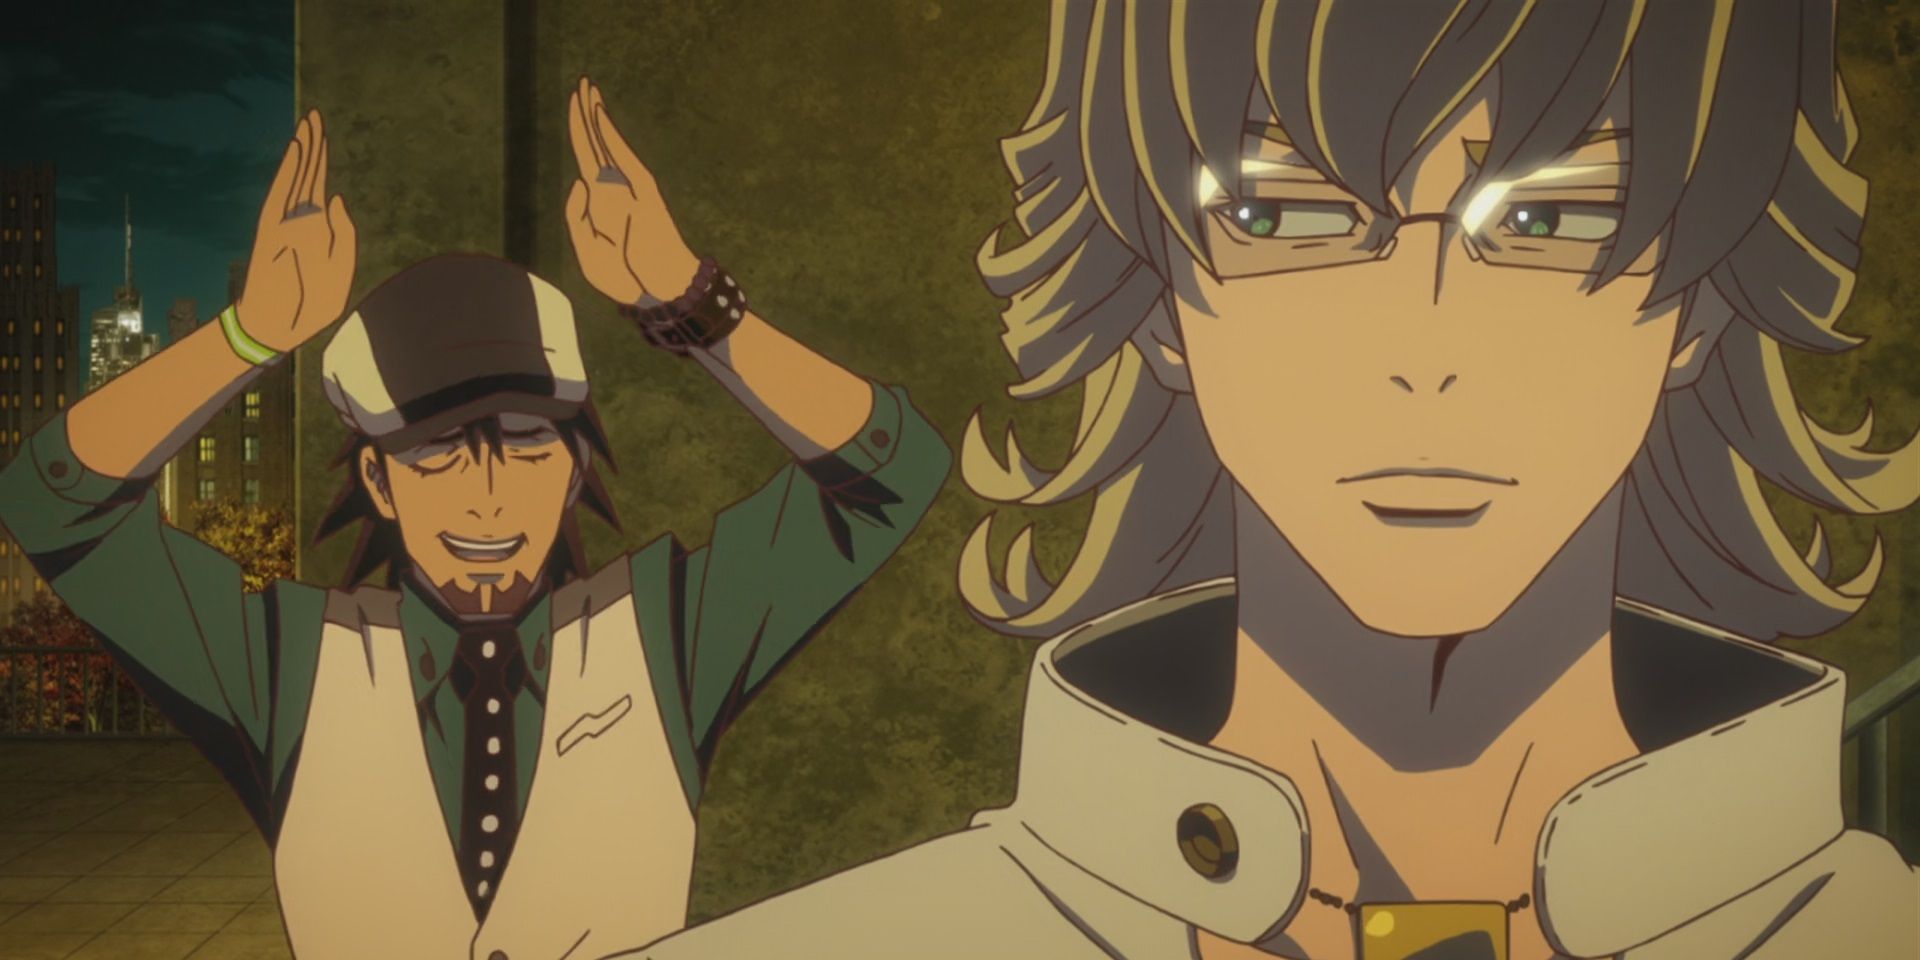 Kotetsu and Barnaby from Tiger and Bunny.